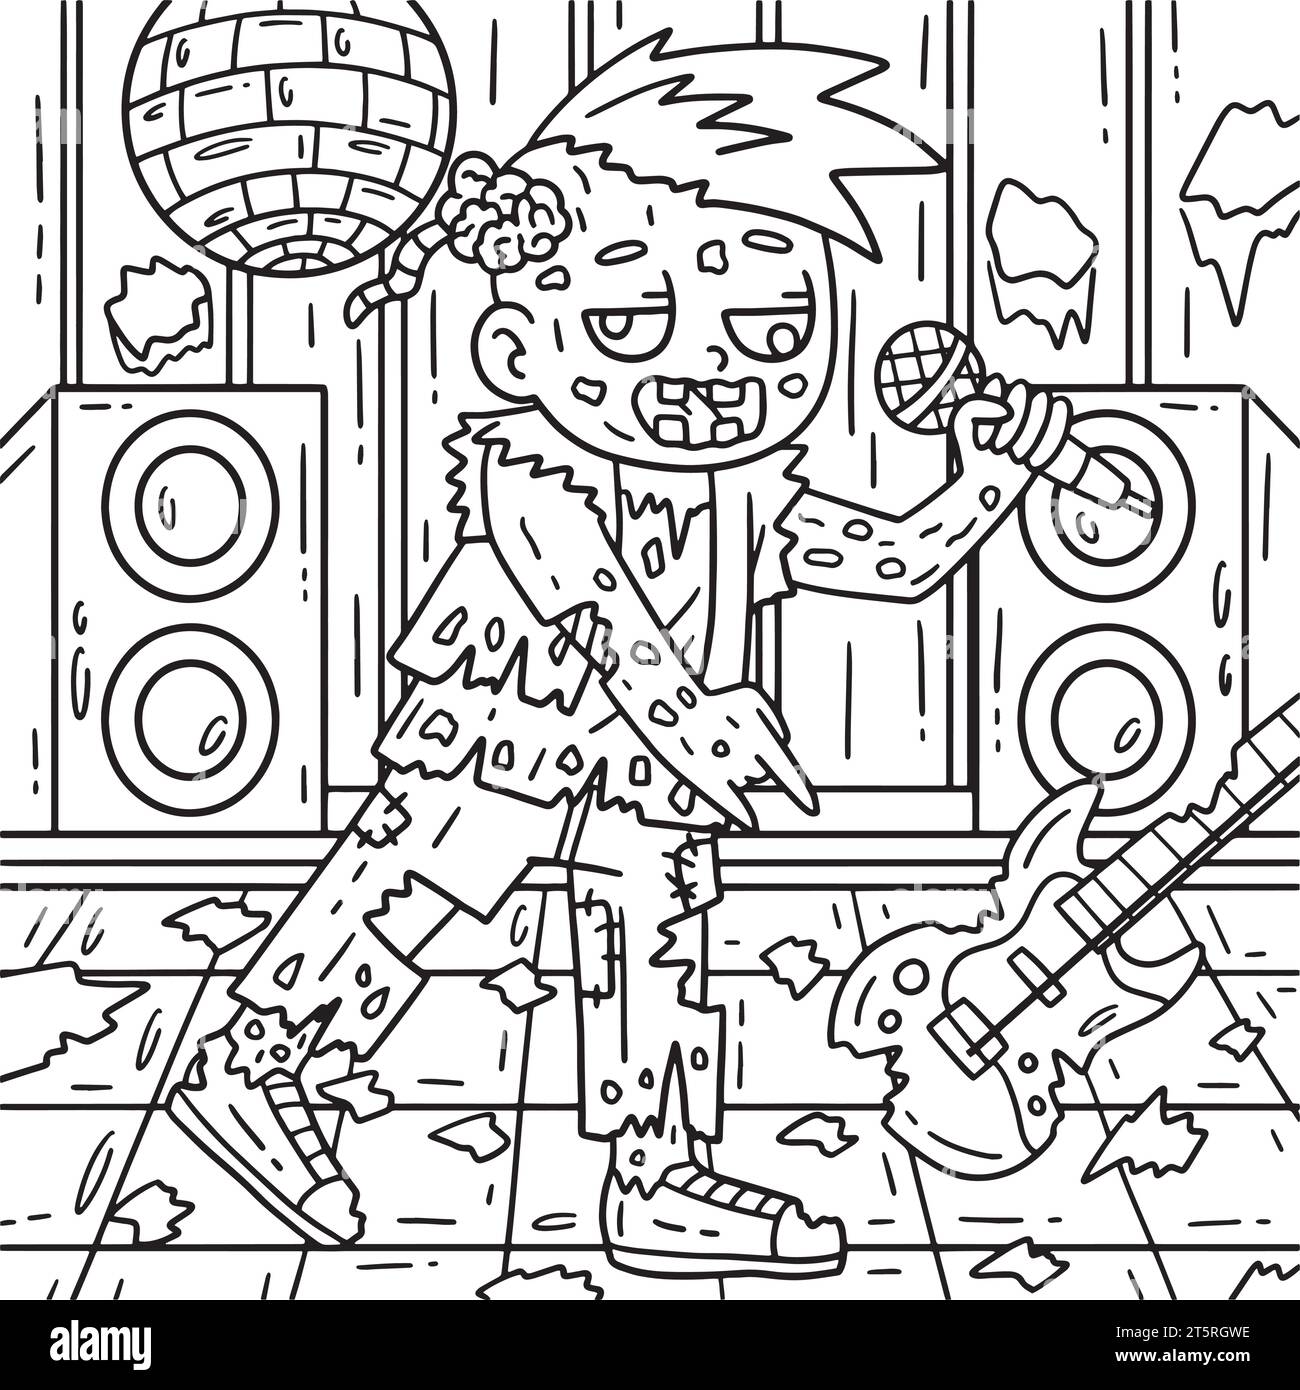 Zombie Rocker Coloring Pages for Kids Stock Vector Image & Art - Alamy